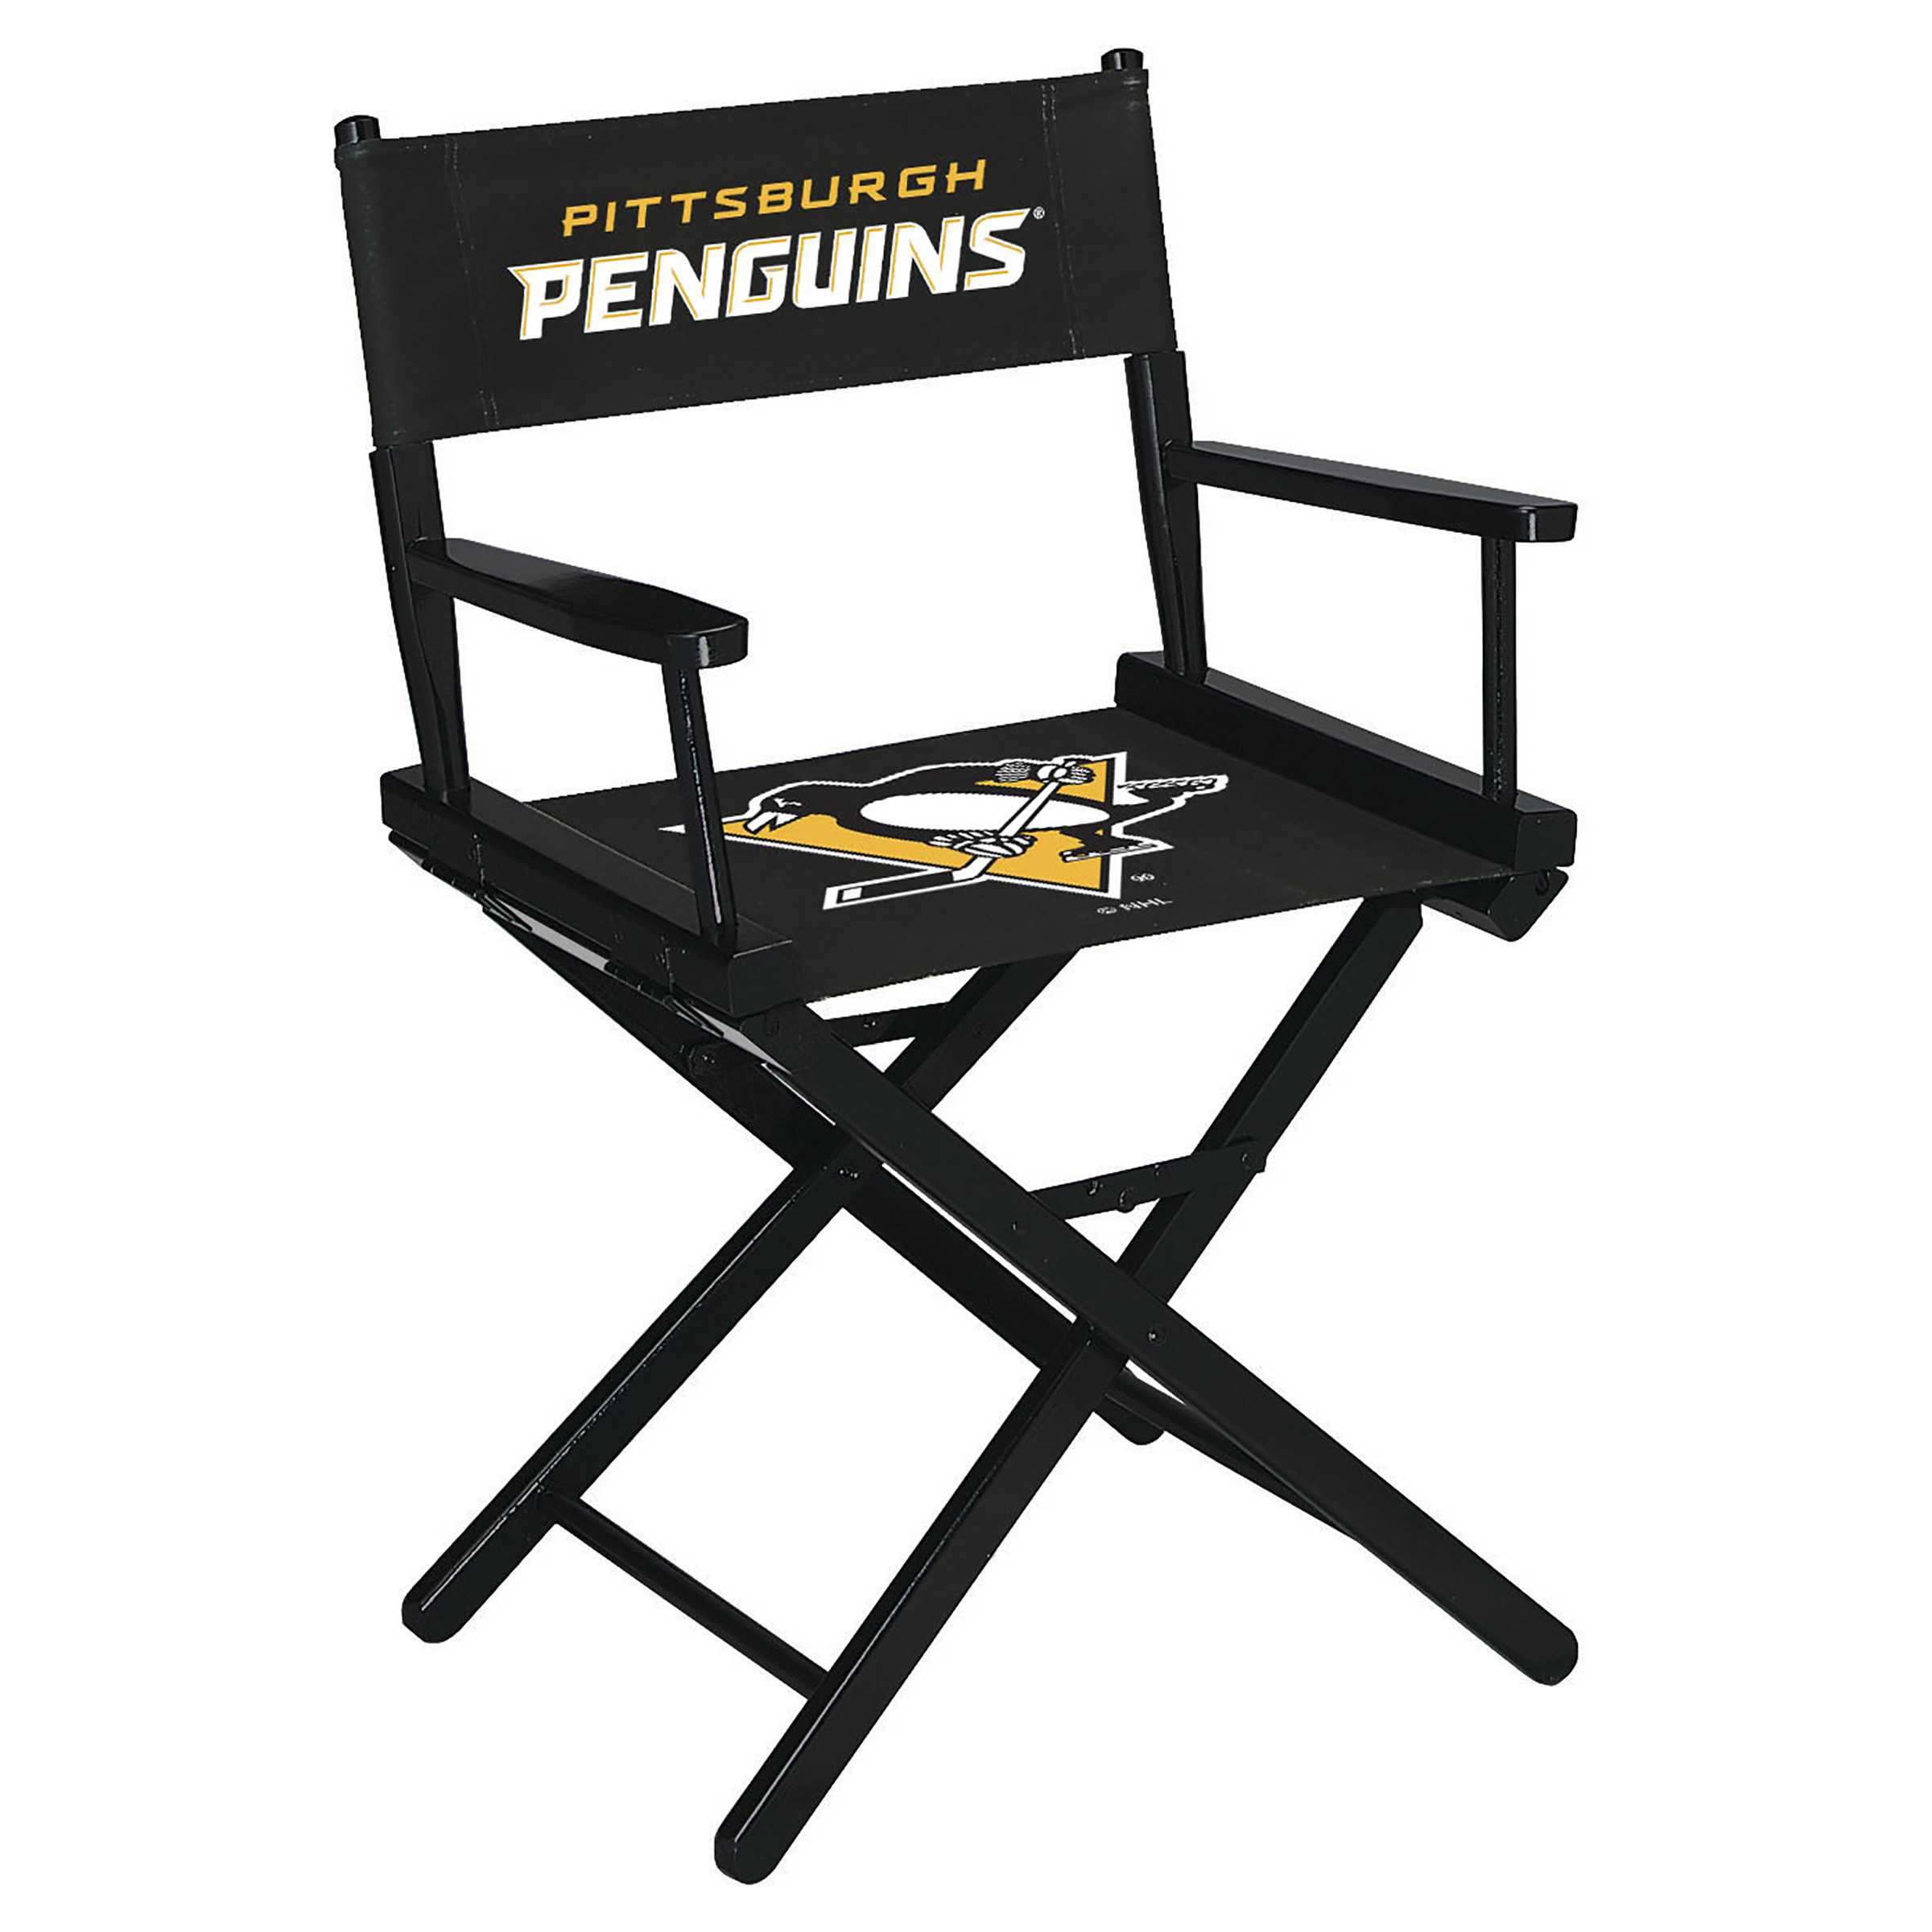 PITTSBURGH PENGUINS TABLE HEIGHT DIRECTORS CHAIR